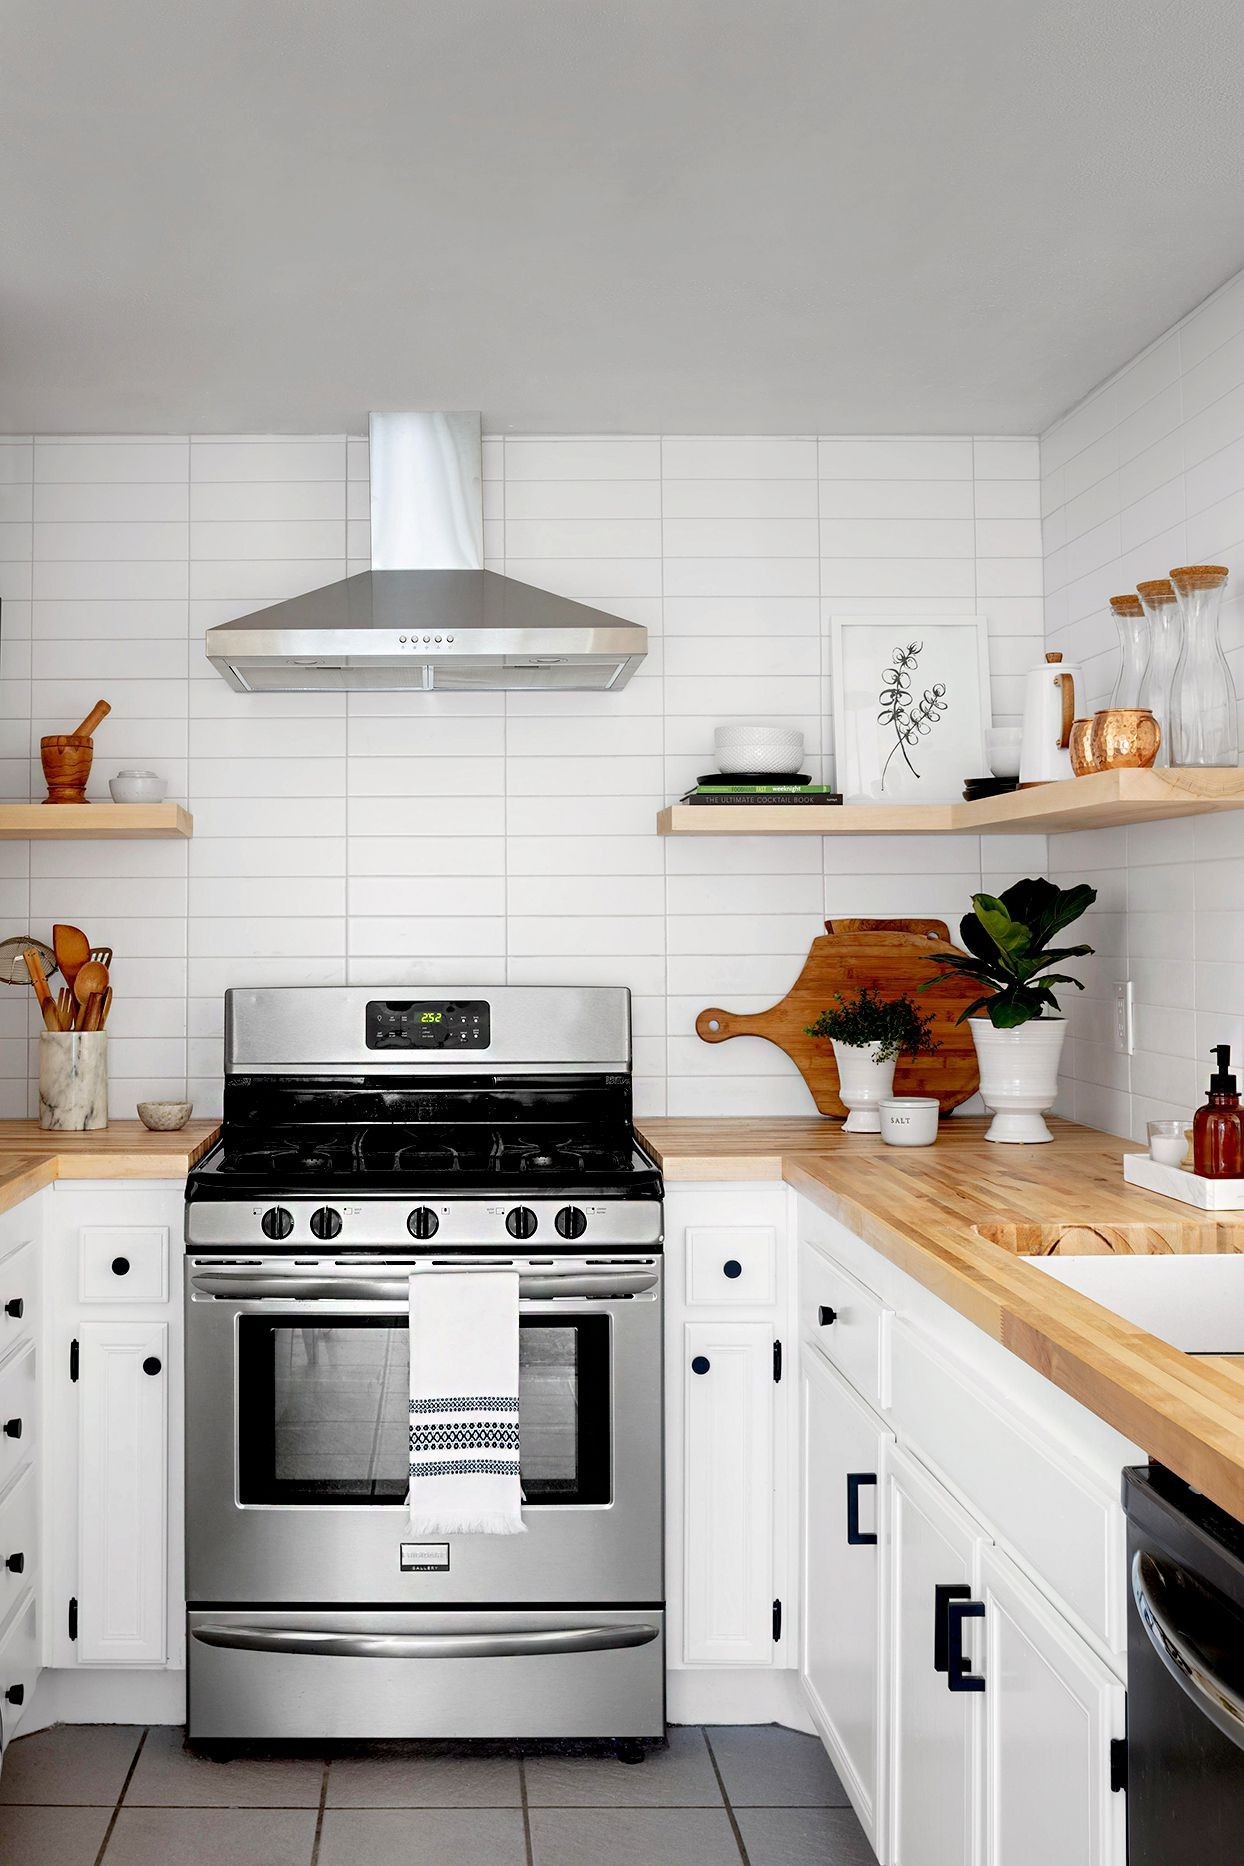 28 Stylish Ideas For Remodeling A Kitchen On A Budget